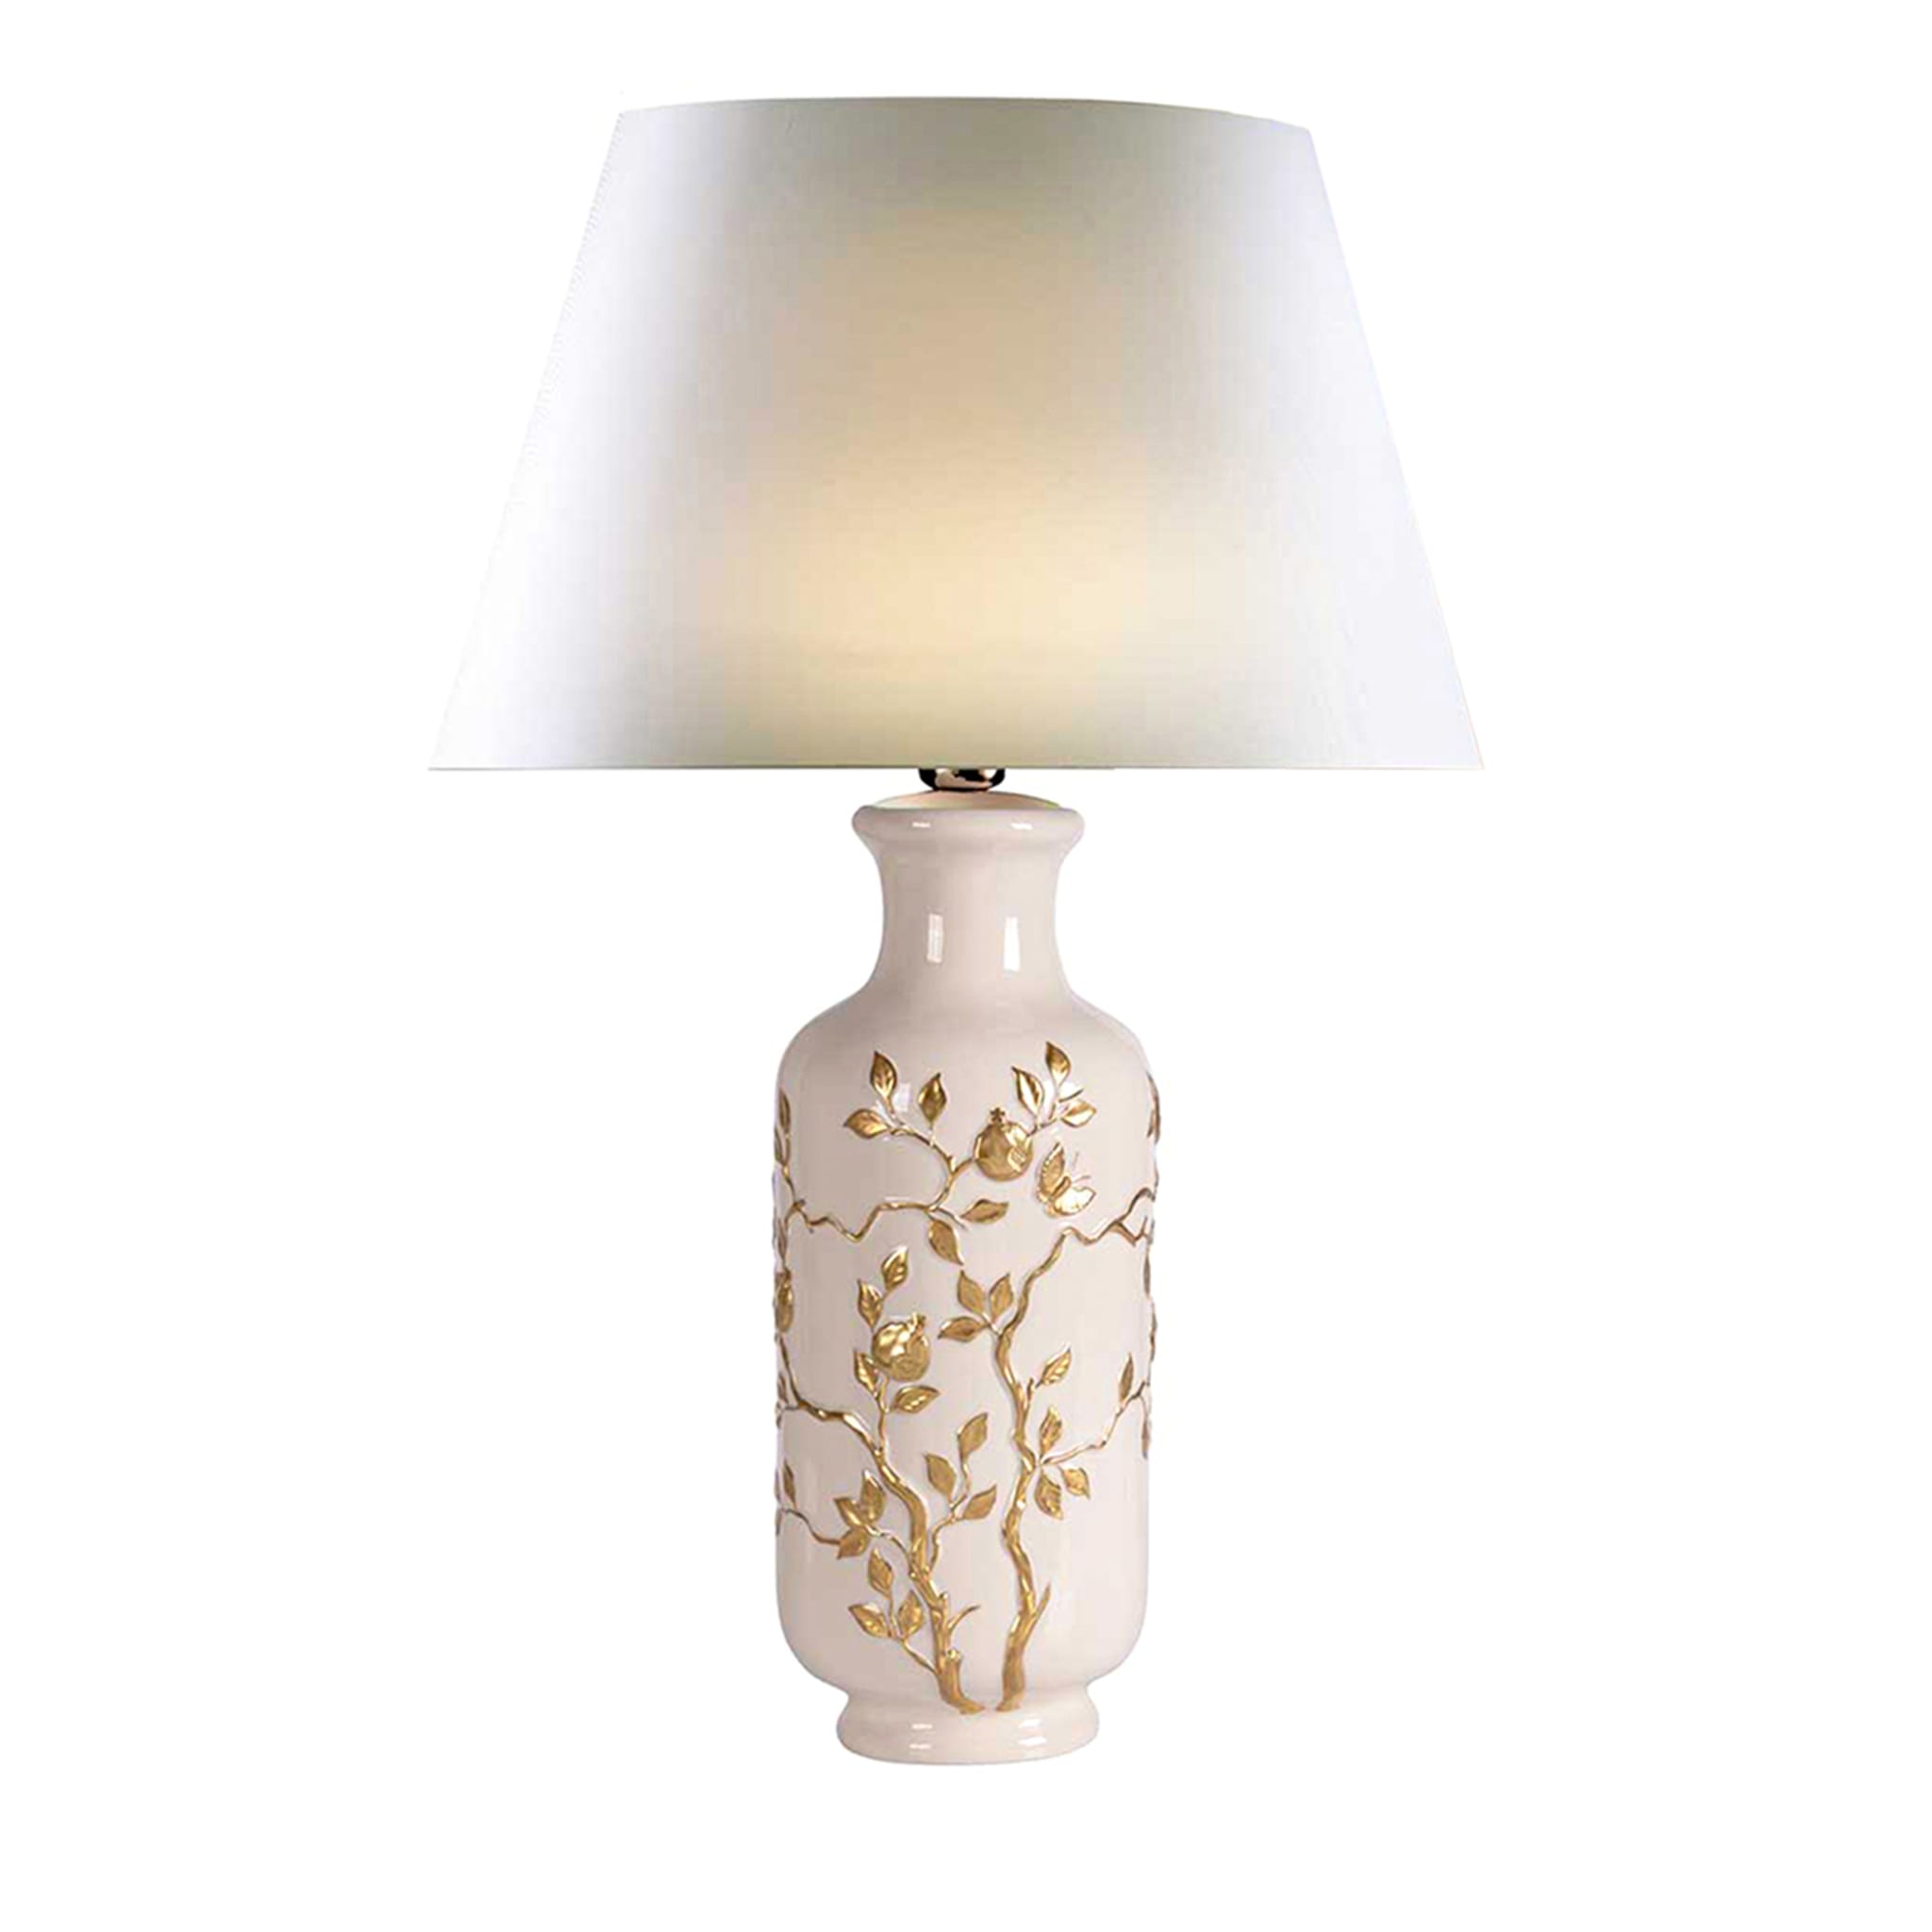 Dafne Small White and Gold Table Lamp - Main view